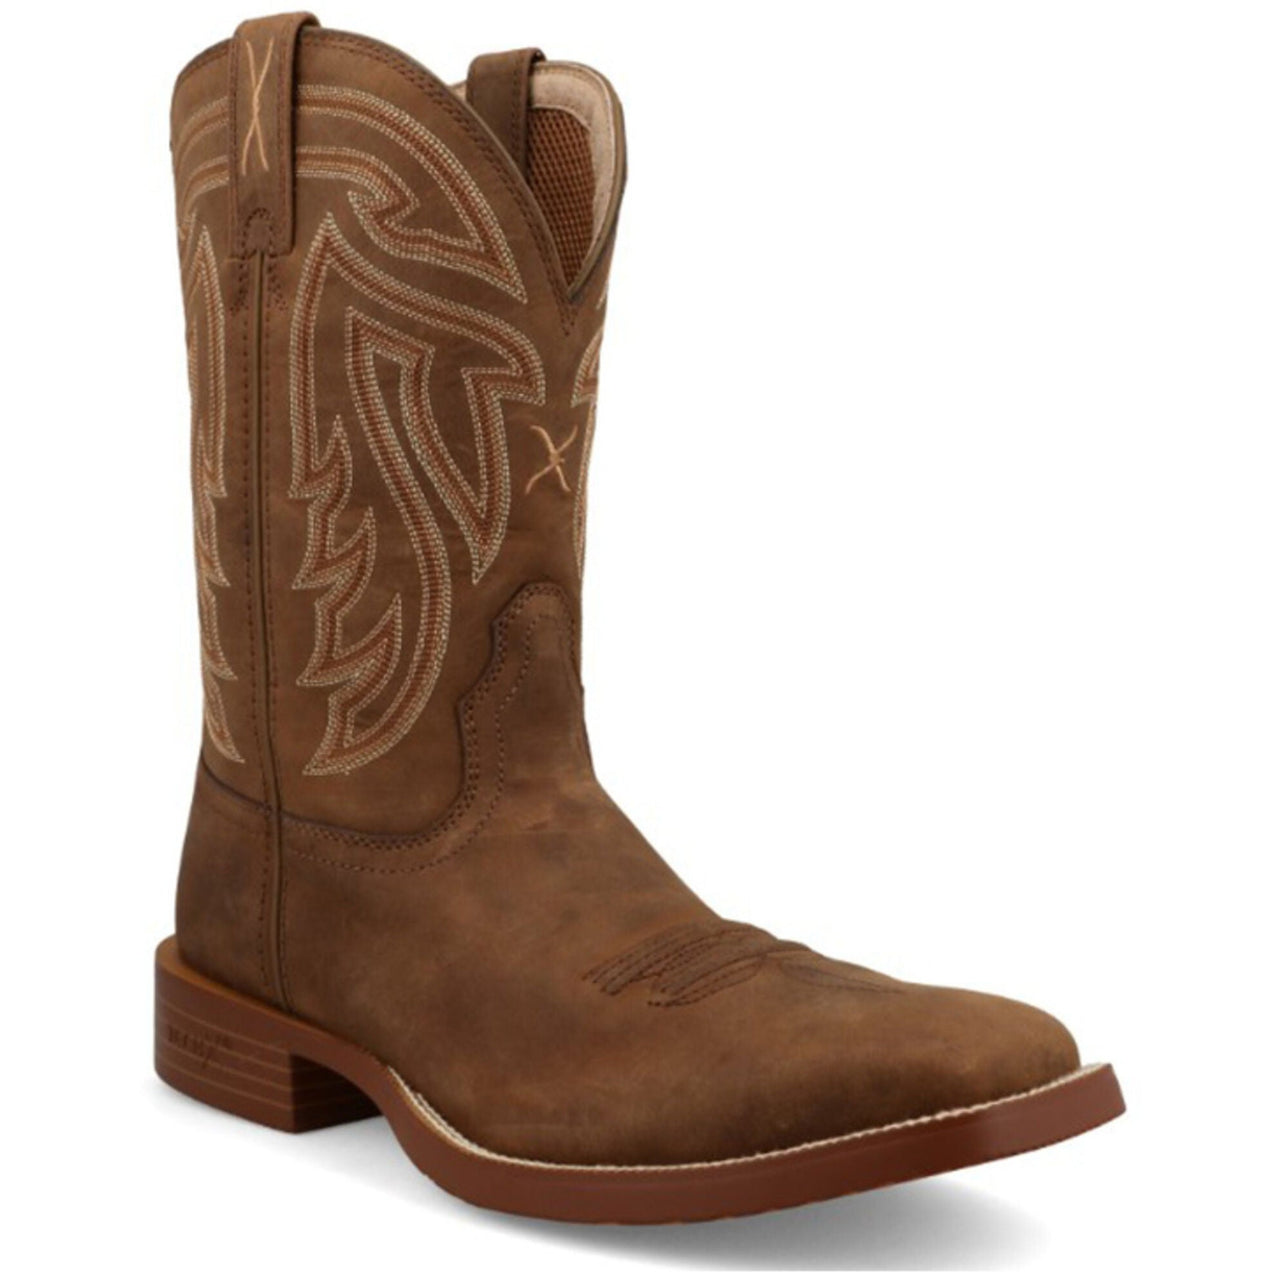 Twisted X Men's 11" Tech Western Boots - Coffee